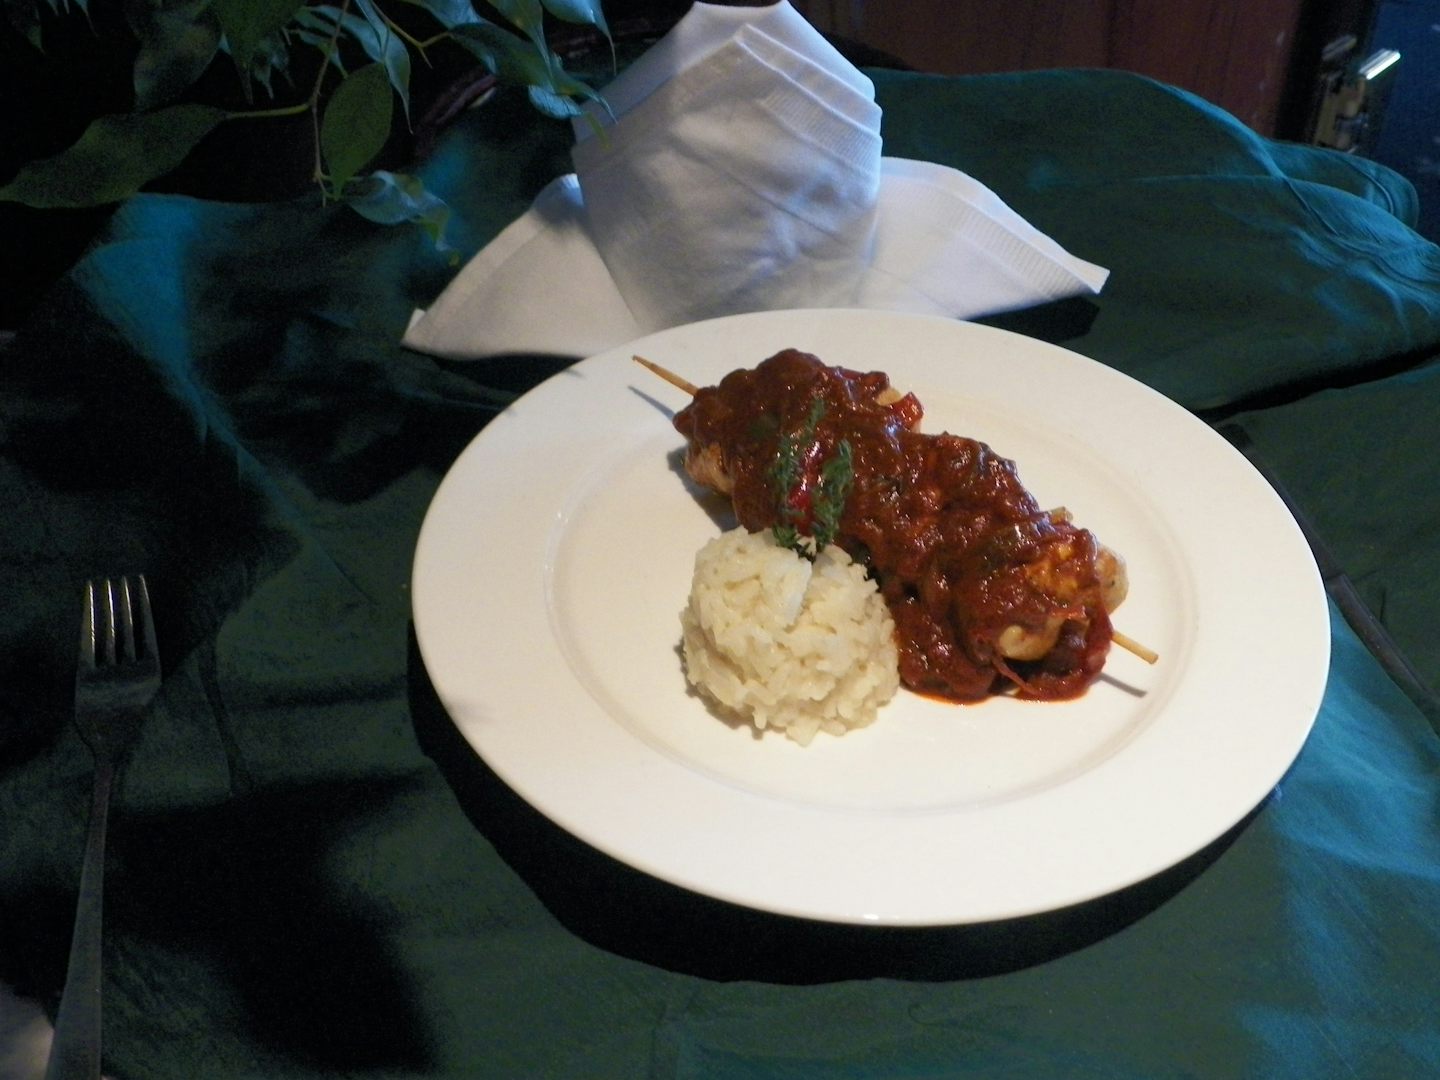 I believe this was stuffed cabbage, as they displayed the main course just outside our room next to dining.